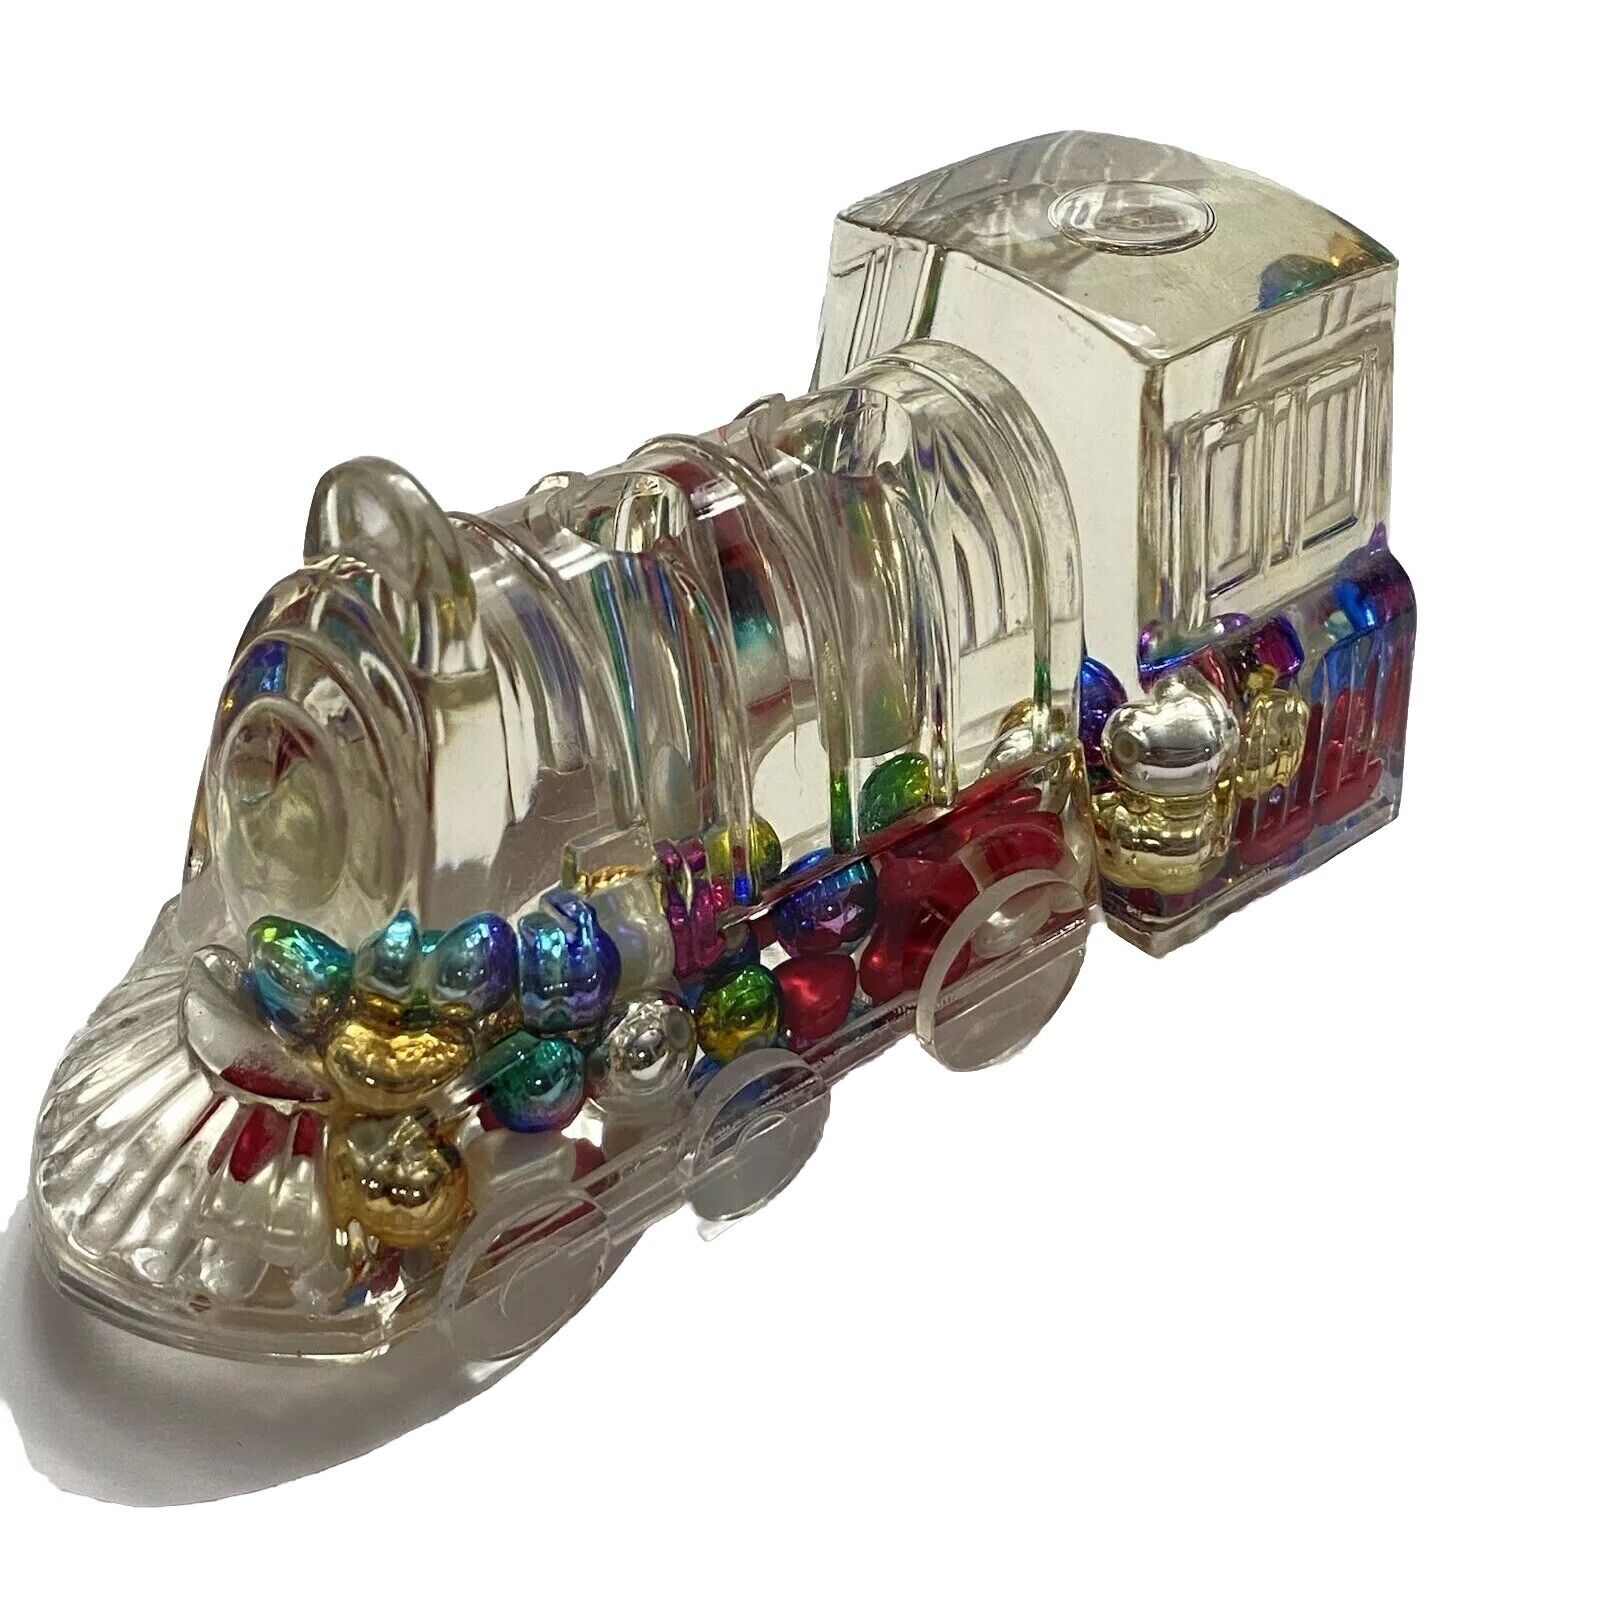 Vintage Train Pen Holder Paperweight Floating Beads Water Filled Locomotive